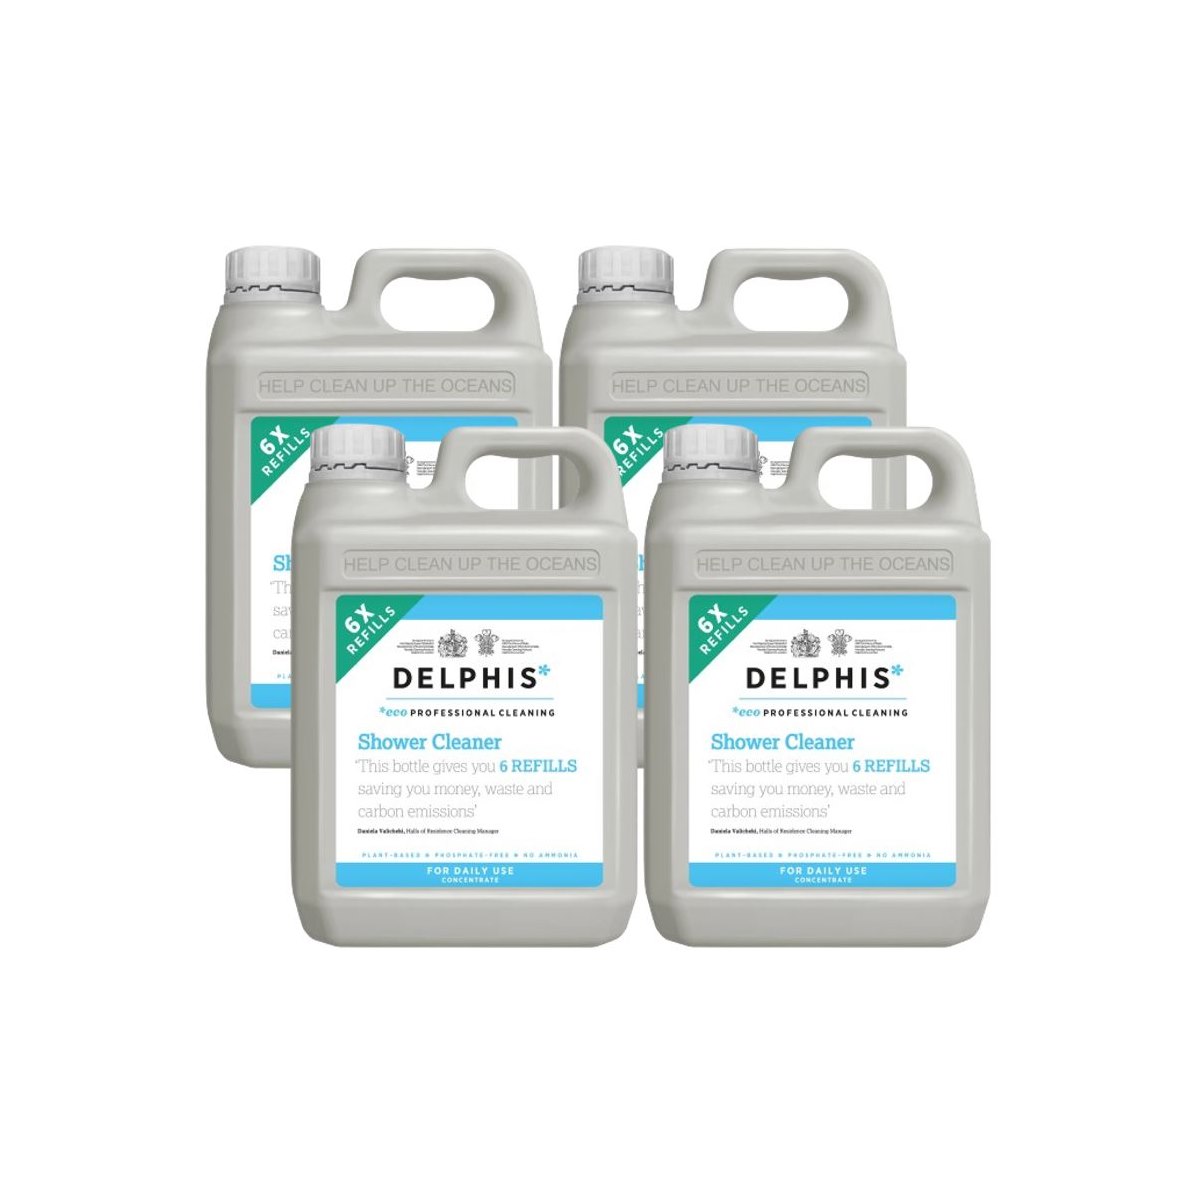 Case of 4 x Delphis Daily Shower Cleaner